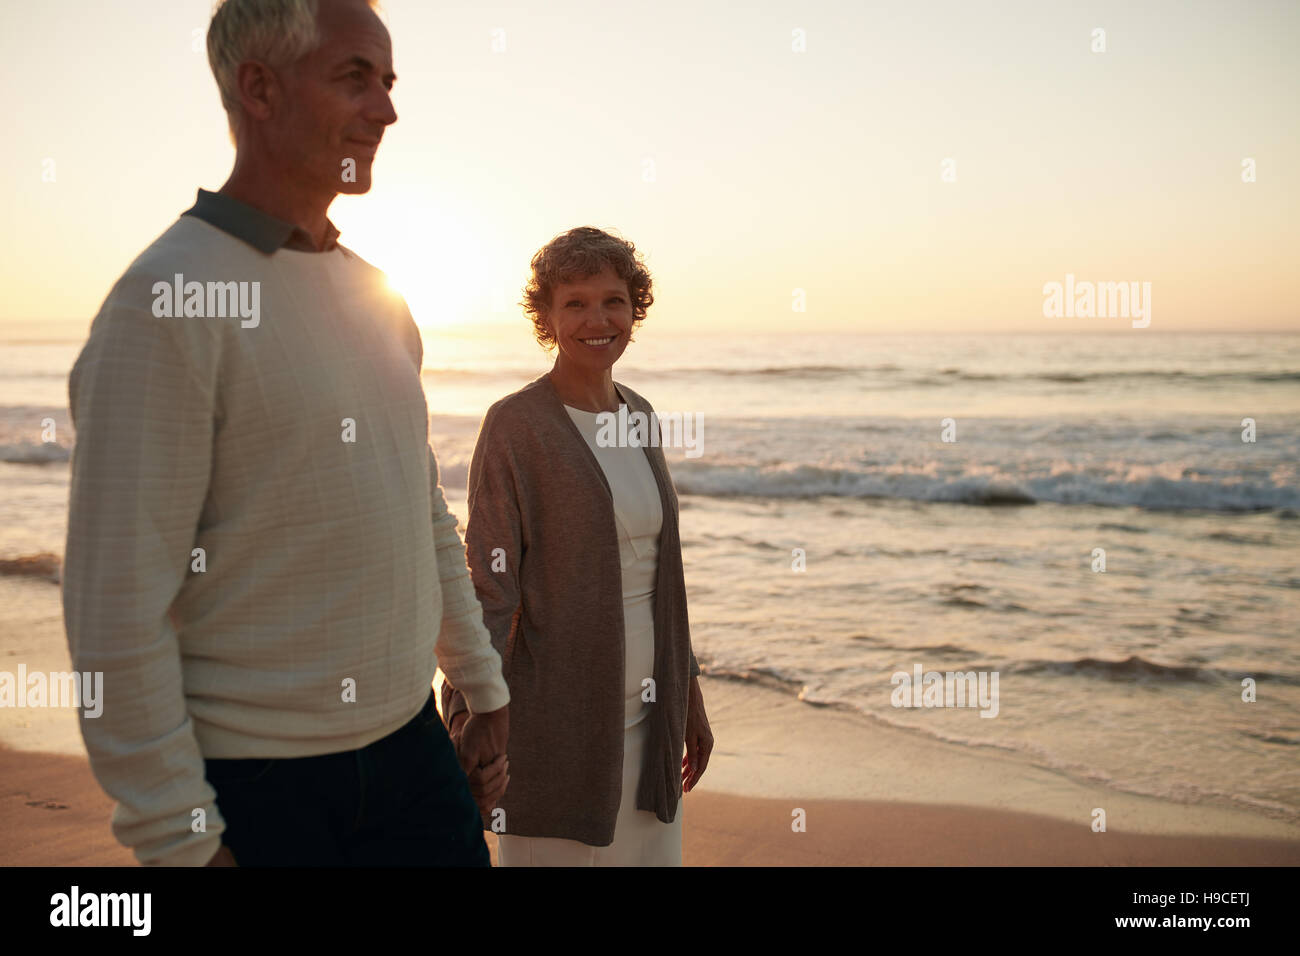 Senior woman with her husband strolling on the beach. Mature couple walking together by the sea. Stock Photo